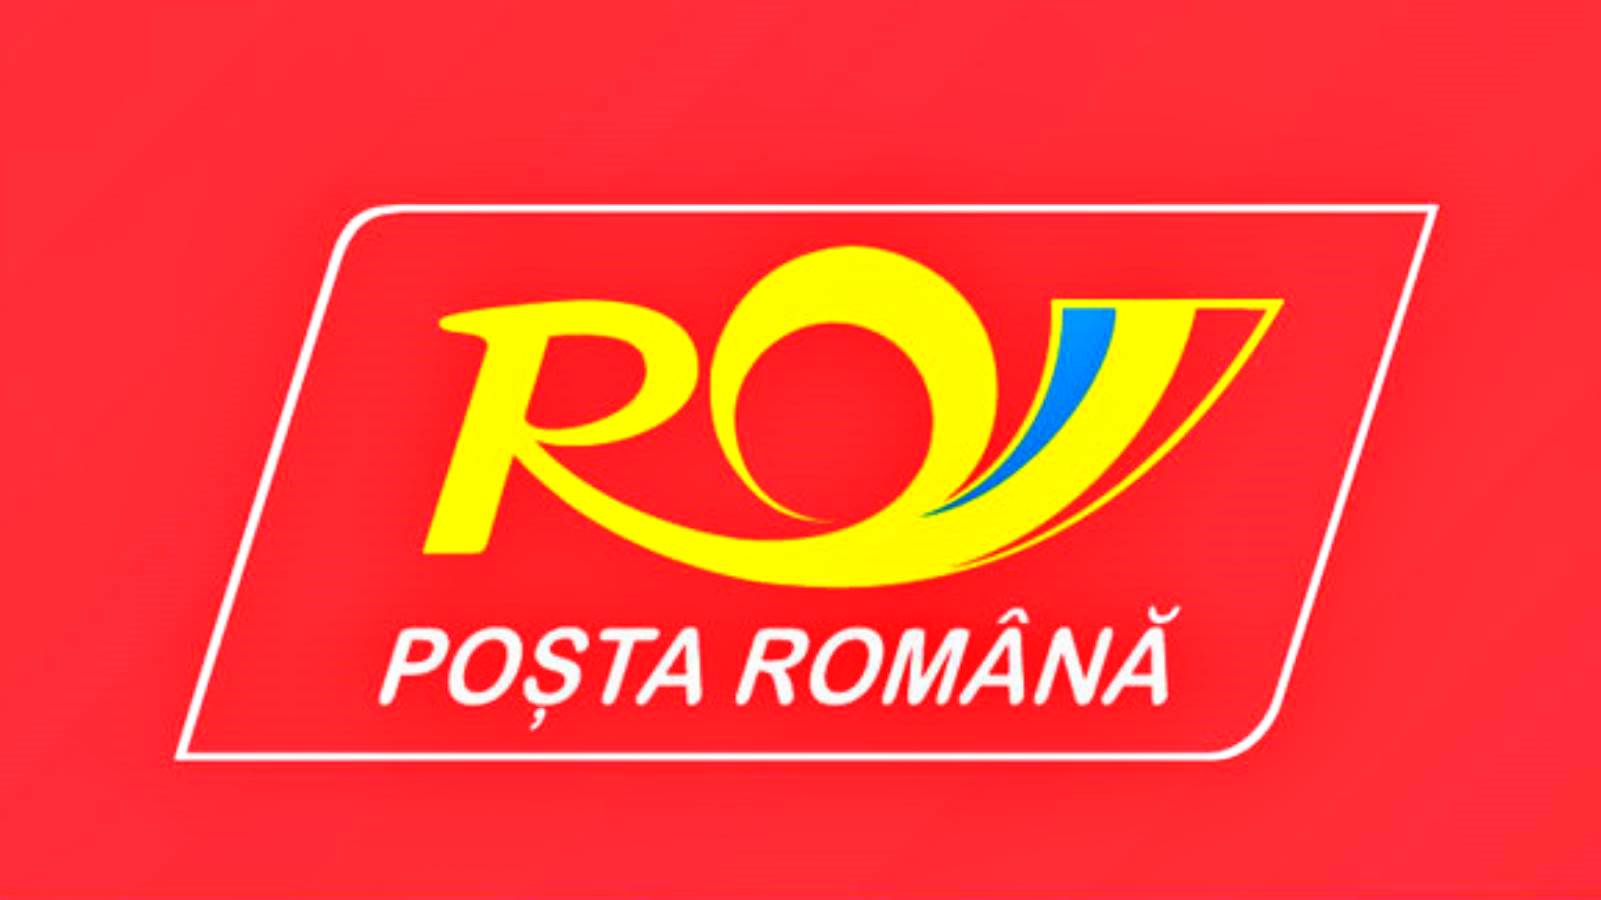 Romanian Post, energy card, old invoices